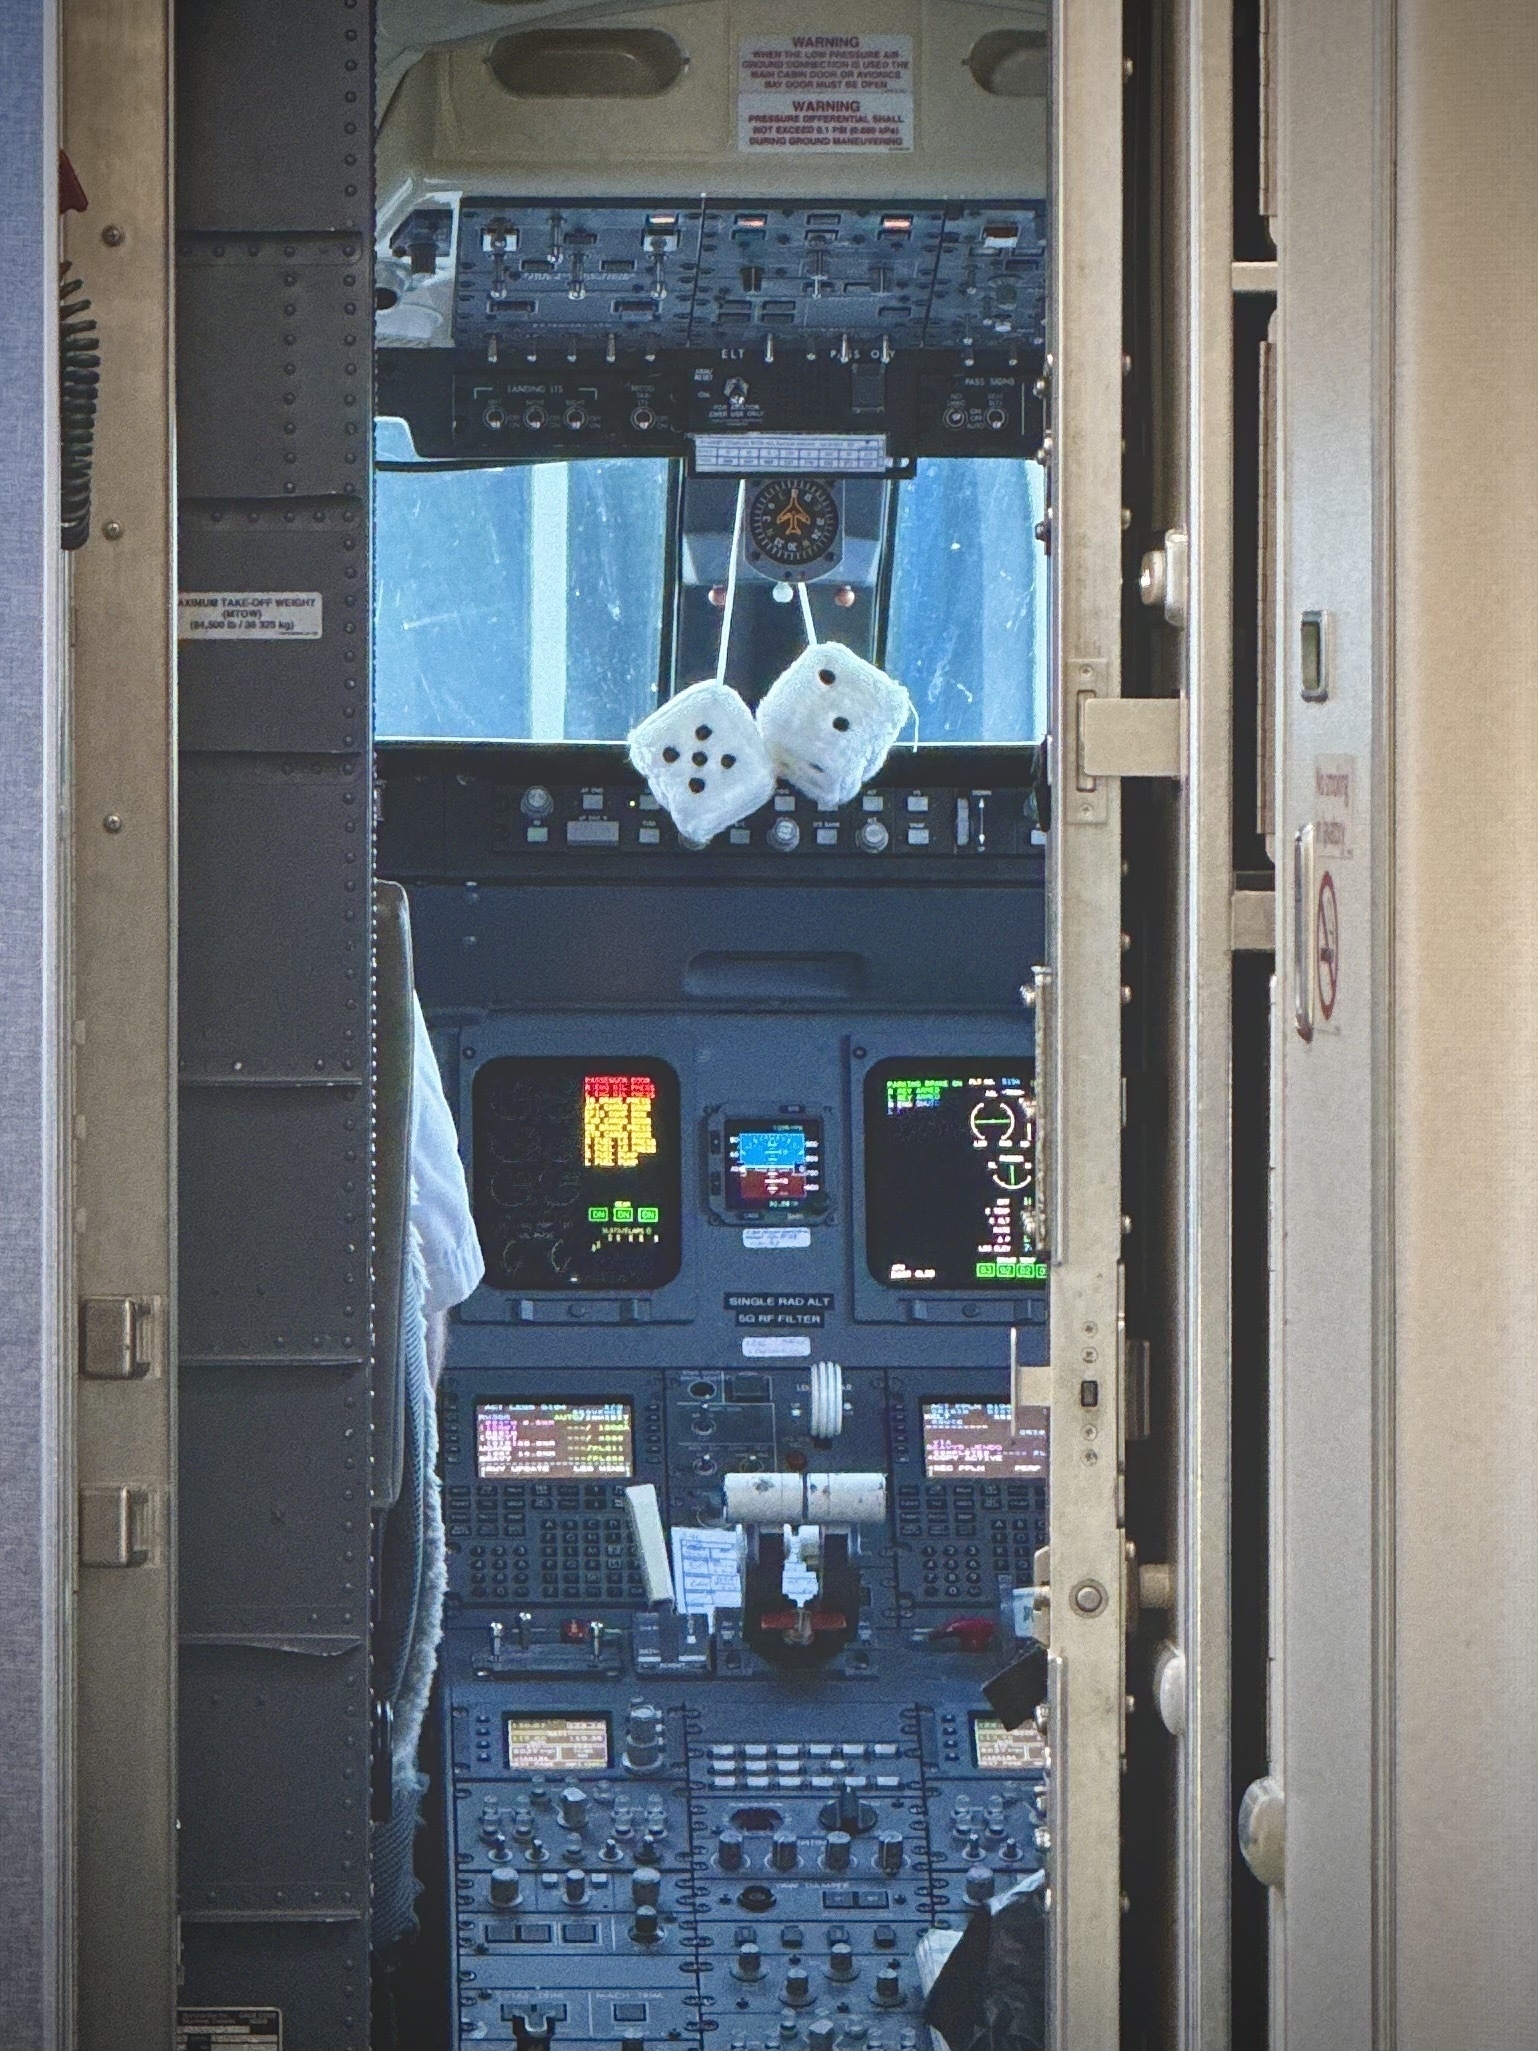 Through the door of a cockpit, some fuzzy dice hang above the flight controls.